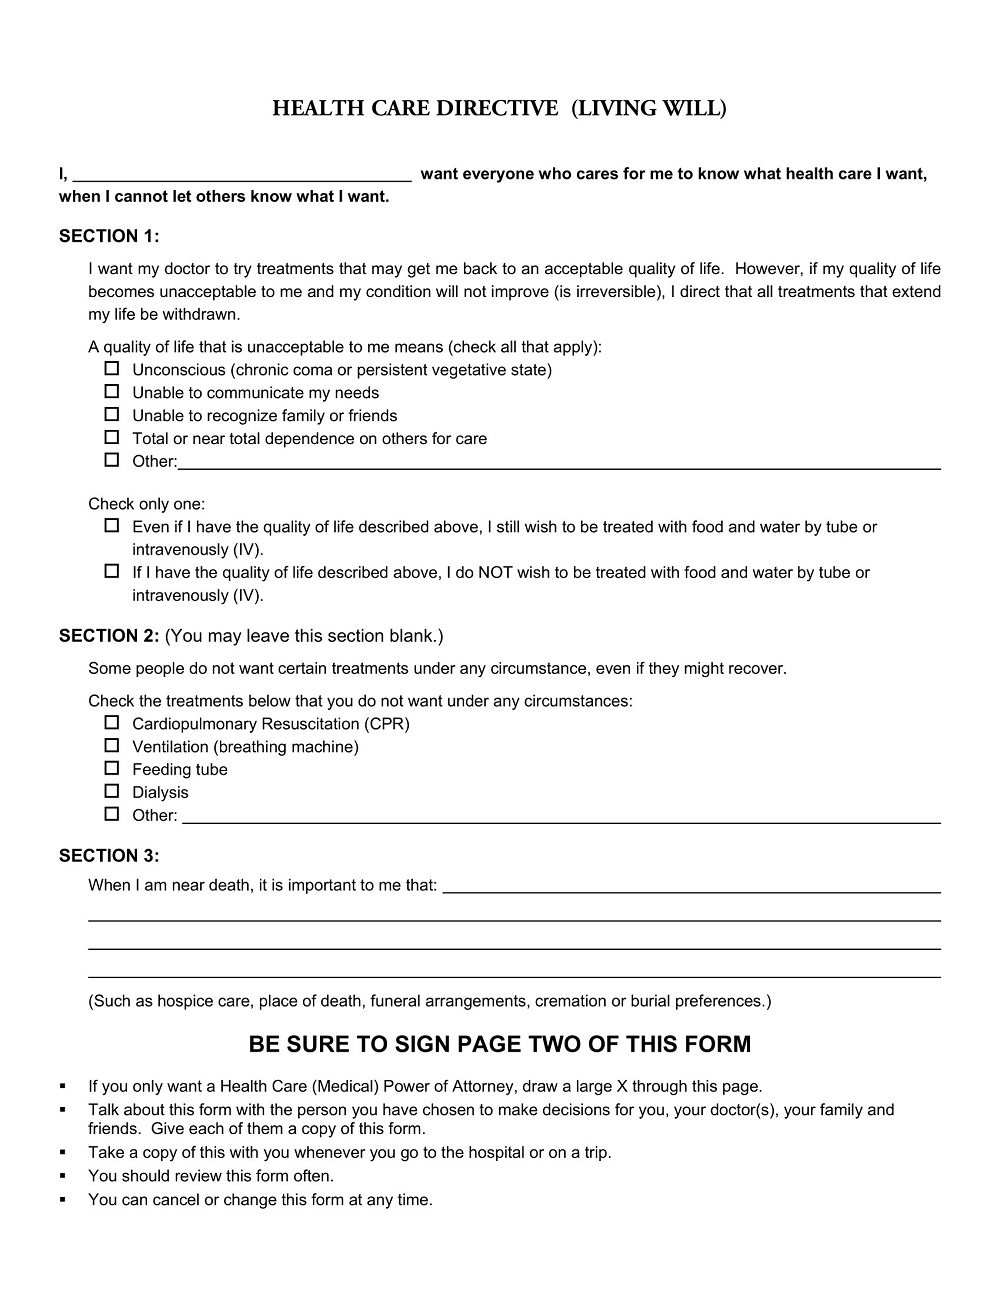 Living Will Template PDF